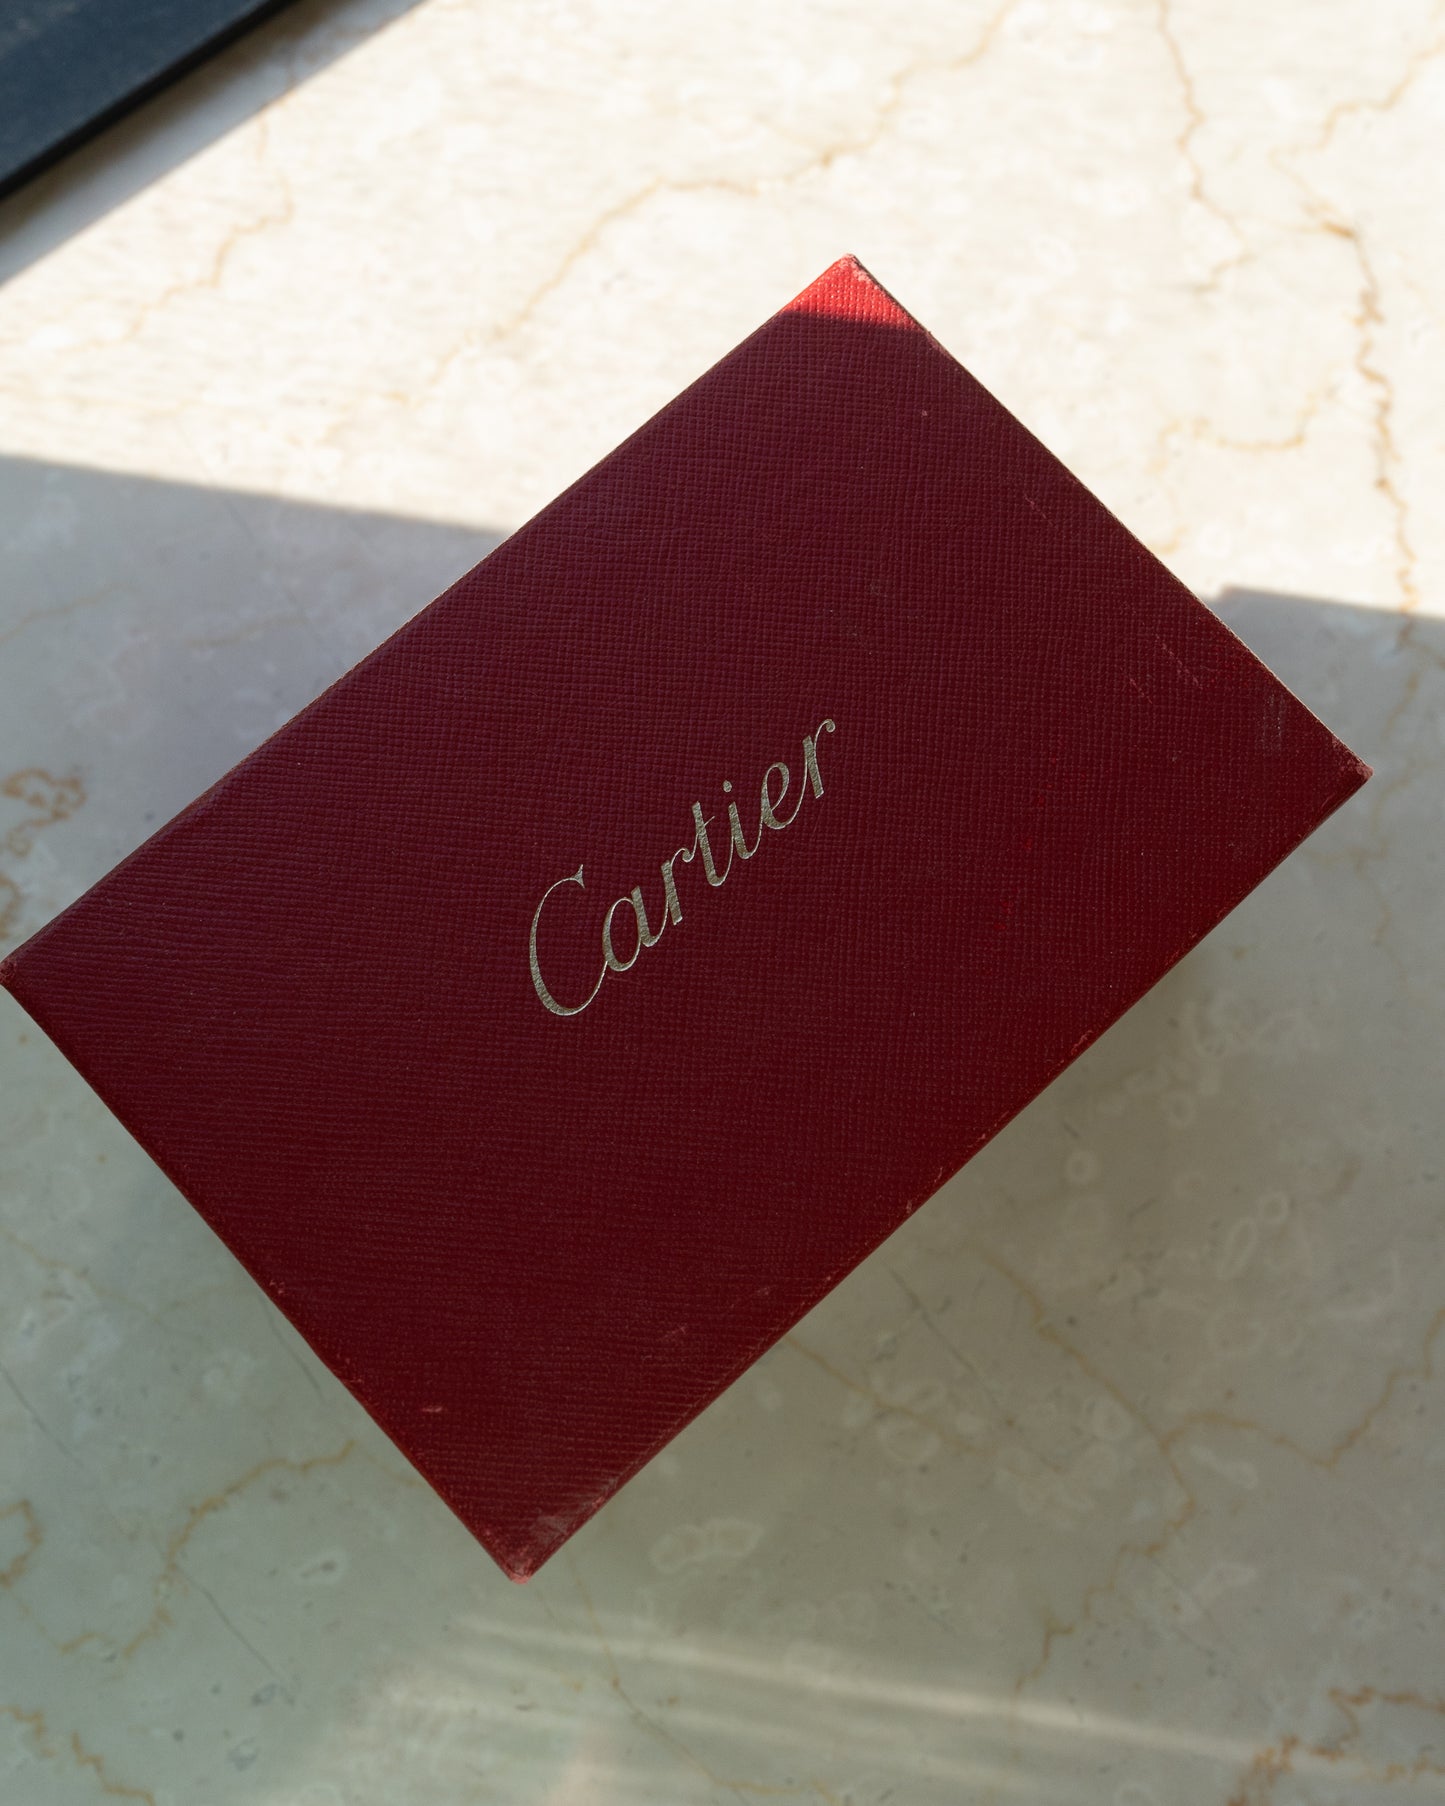 Cartier Black Calf Watch Tube - used